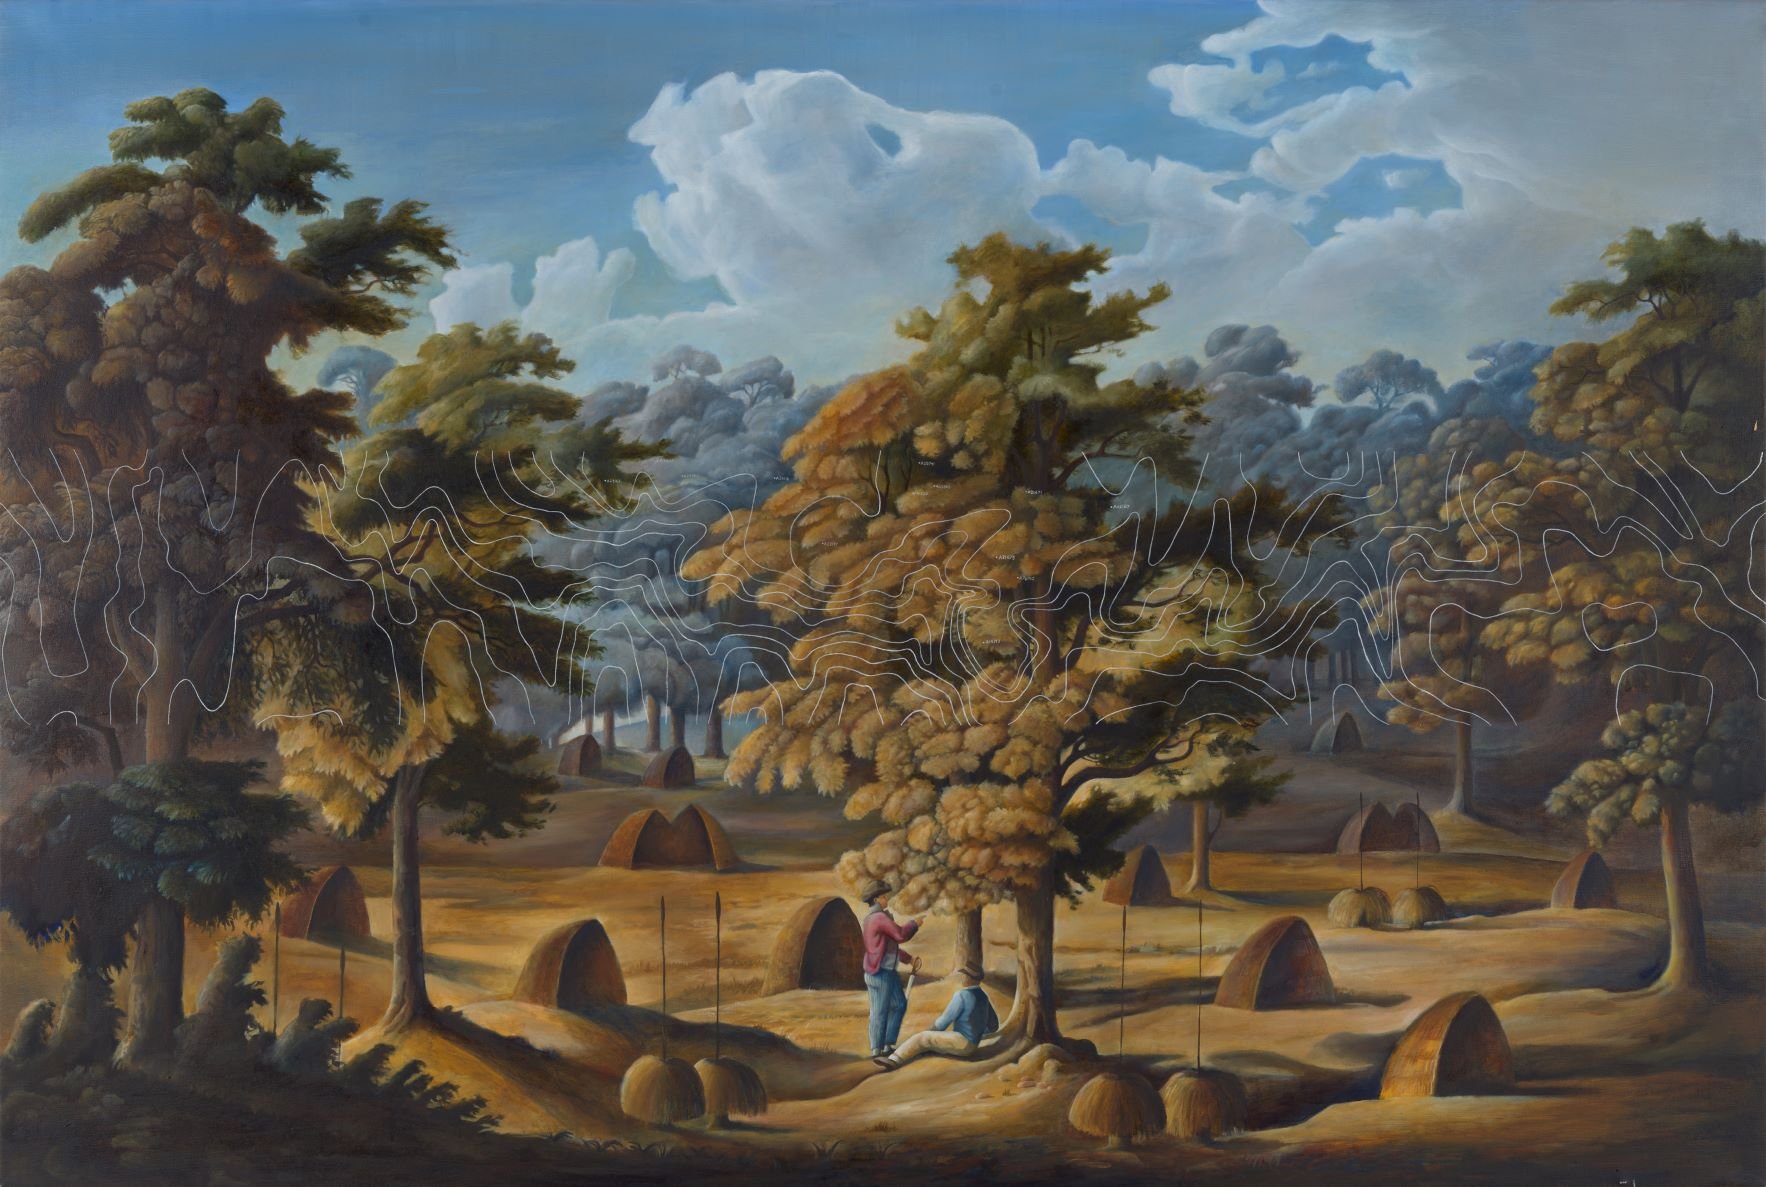  Christopher Pease, Minang/Wardandi/Bibbulmun peoples, ‘Wrong side of the Hay (A deserted Indian village)’, 2005, oil on linen, 122 x 180 x 4.5 cm, The Wesfarmers Collection of Australian Art, © Christopher Pease and Gallerysmith, Naarm/Melbourne. 